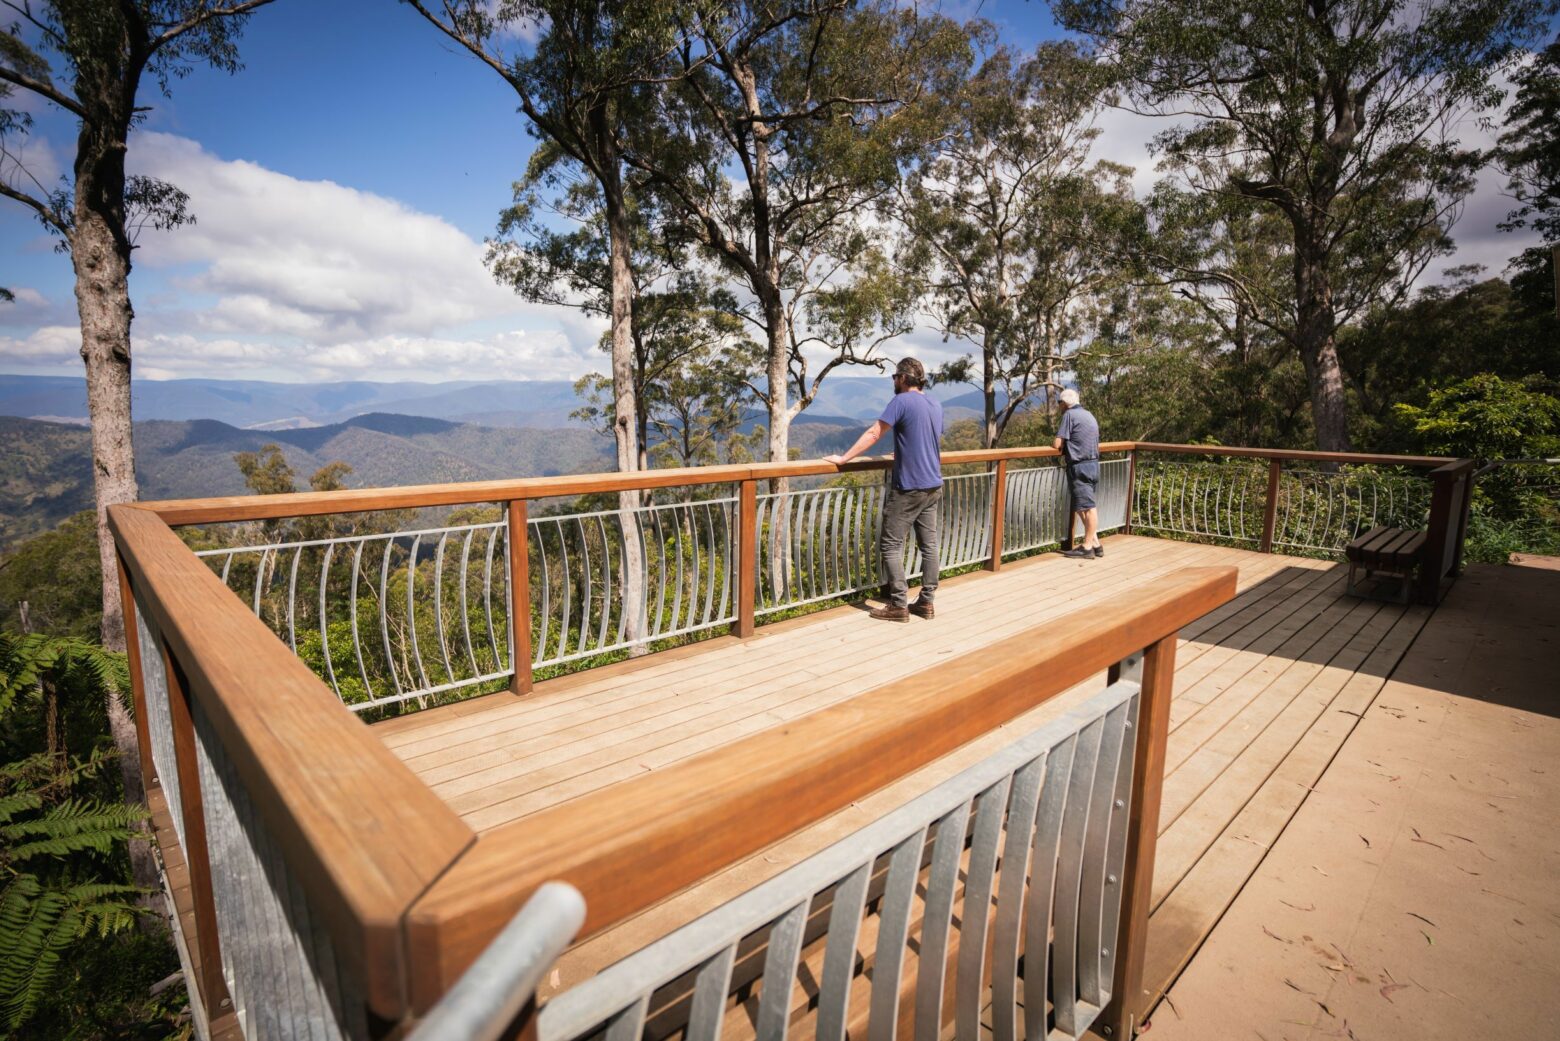 Cobark Lookout in Barrington Tops State Forest also has a picnic table and interpretive signage.